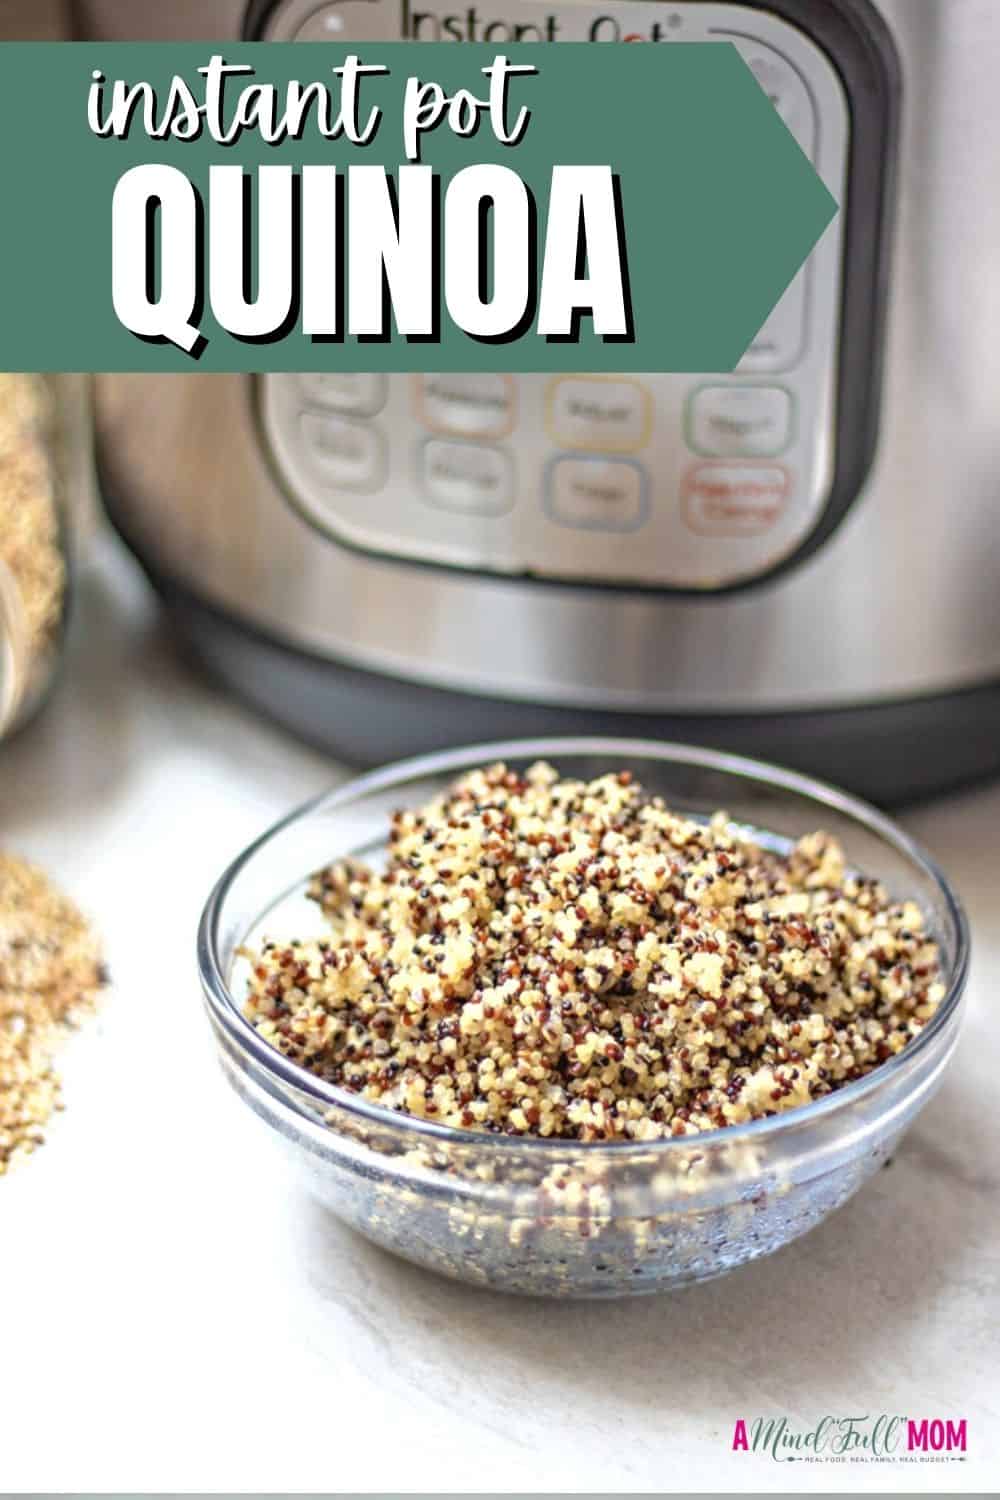 Learn to make fluffy, perfectly cooked Quinoa using your Instant Pot with this fool-proof recipe for Instant Pot Quinoa. 